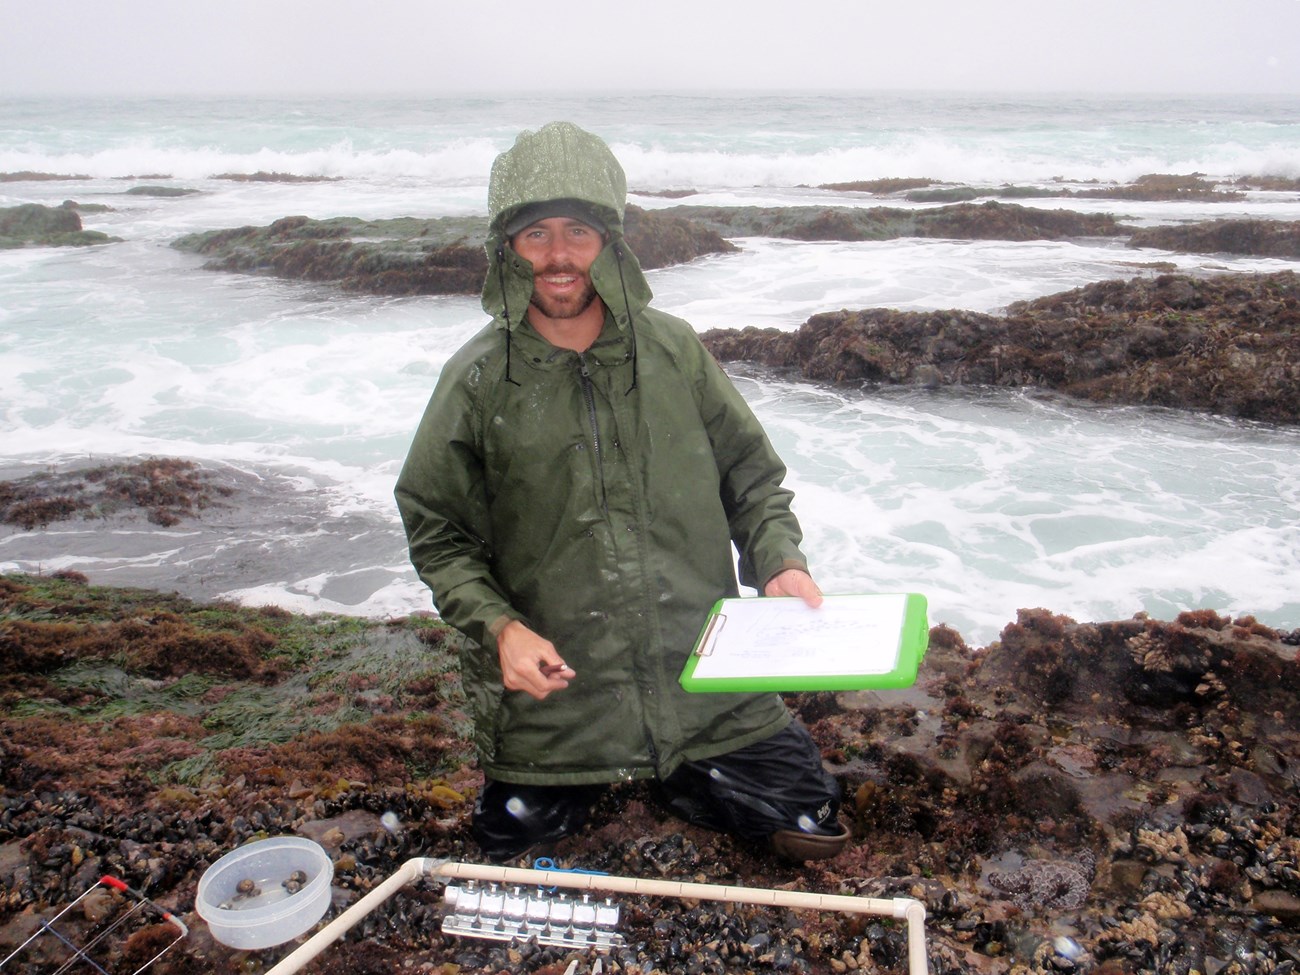 Steve in rain gear, holding a clipboard in front of a rocky intertidal plot as the ocean churns right behind him.